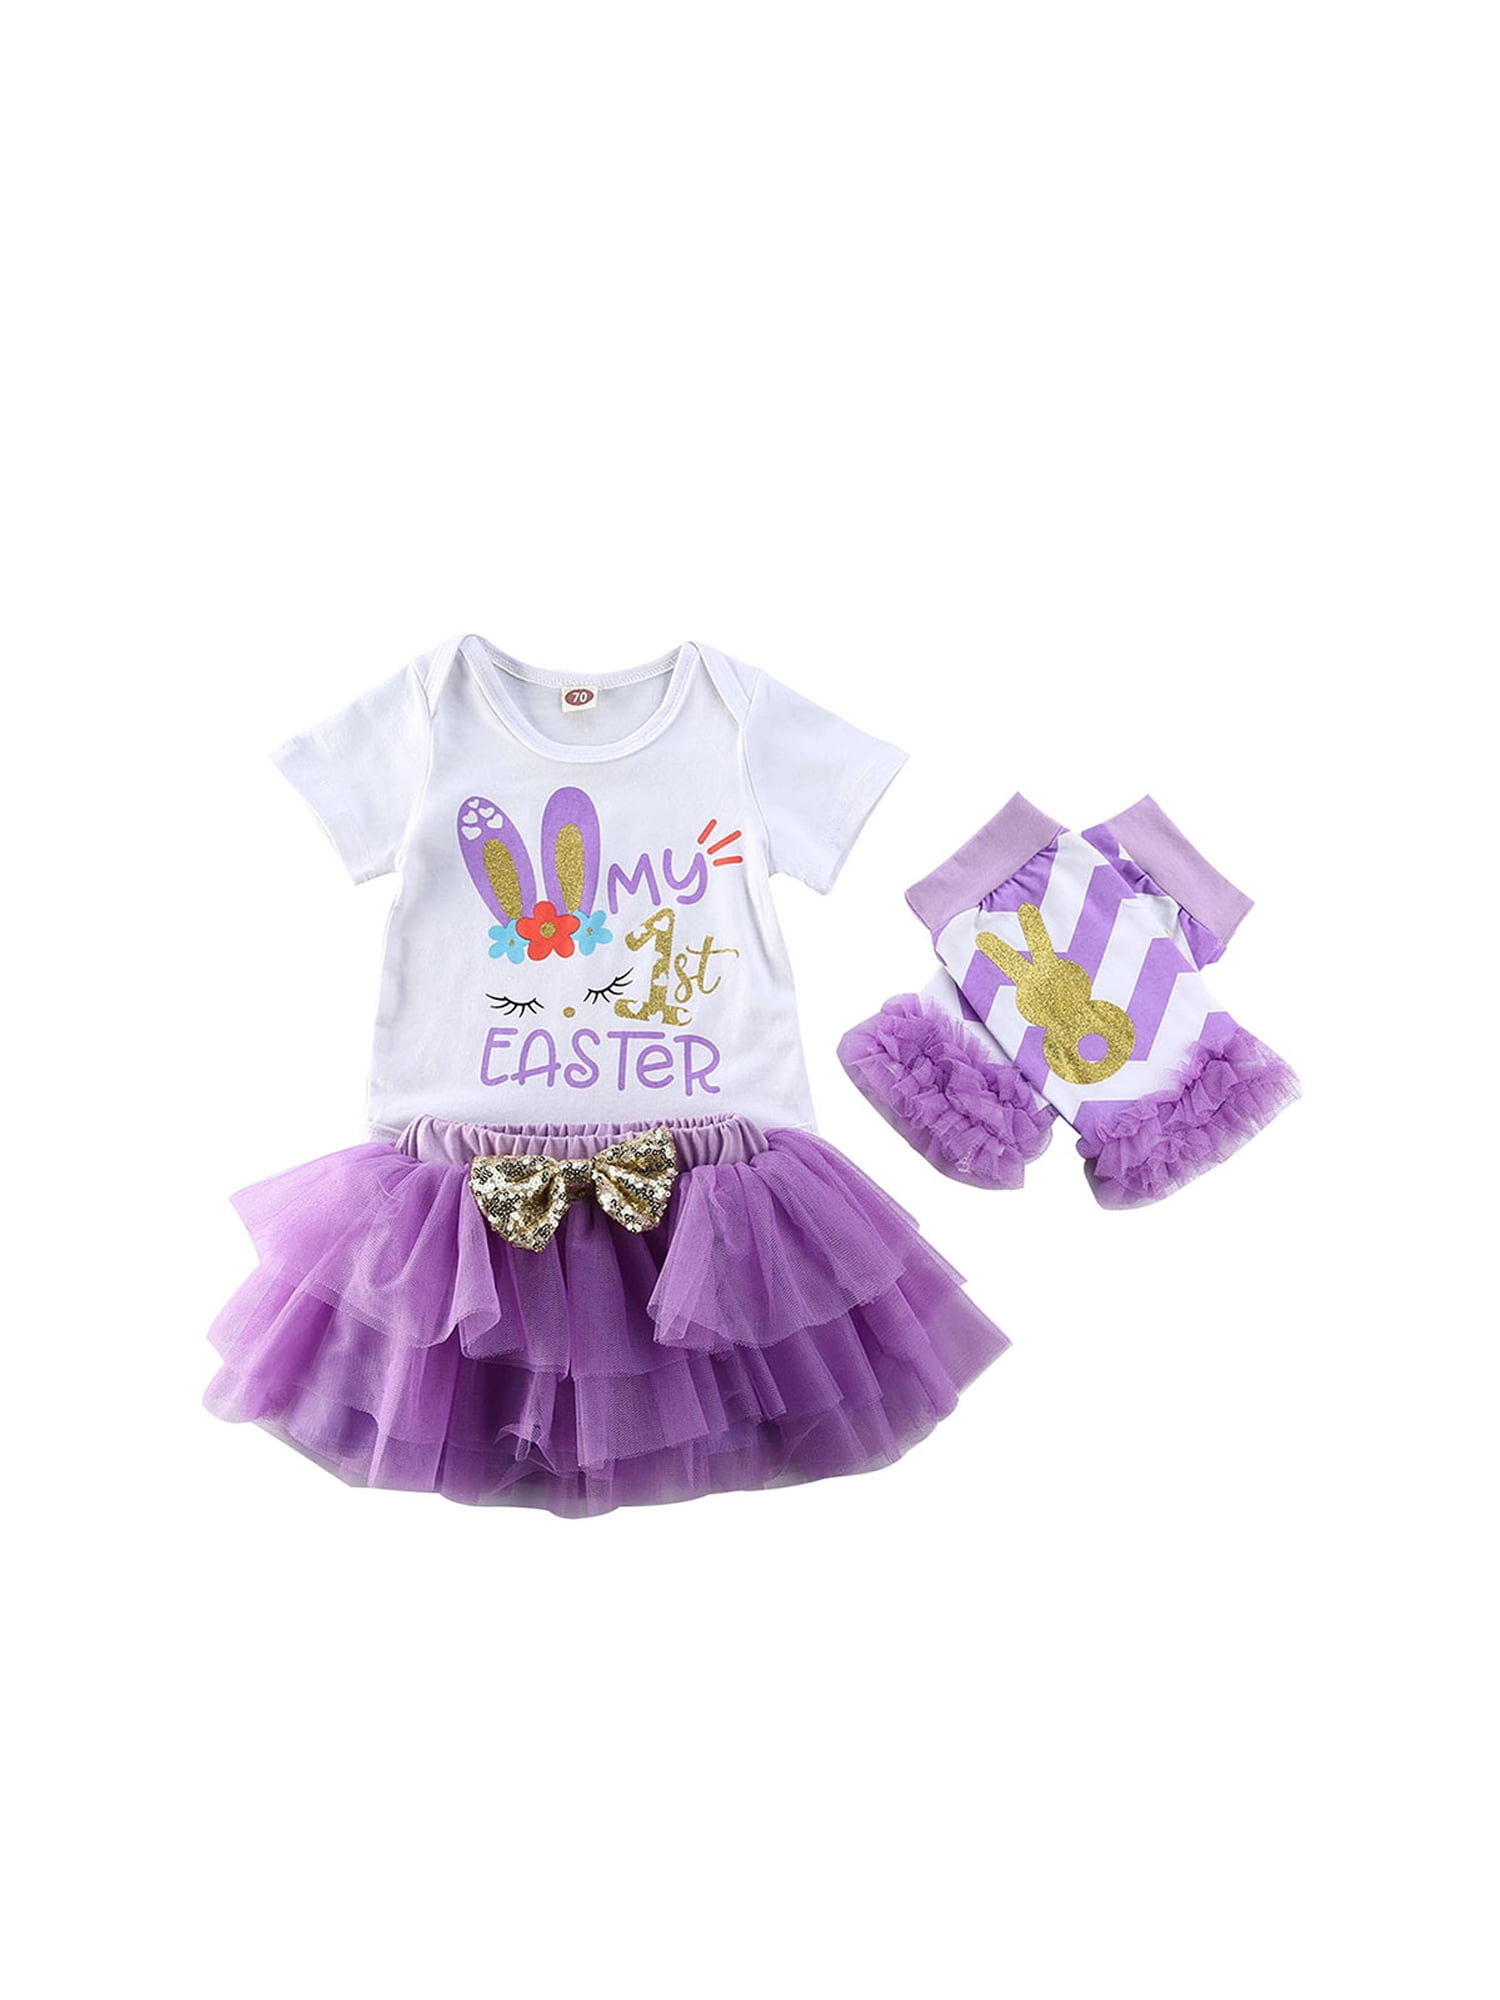 Baby Girl My First Easter Outfit Letter Romper+Pink Rabbit Skirt+Leg Warmers+Headband